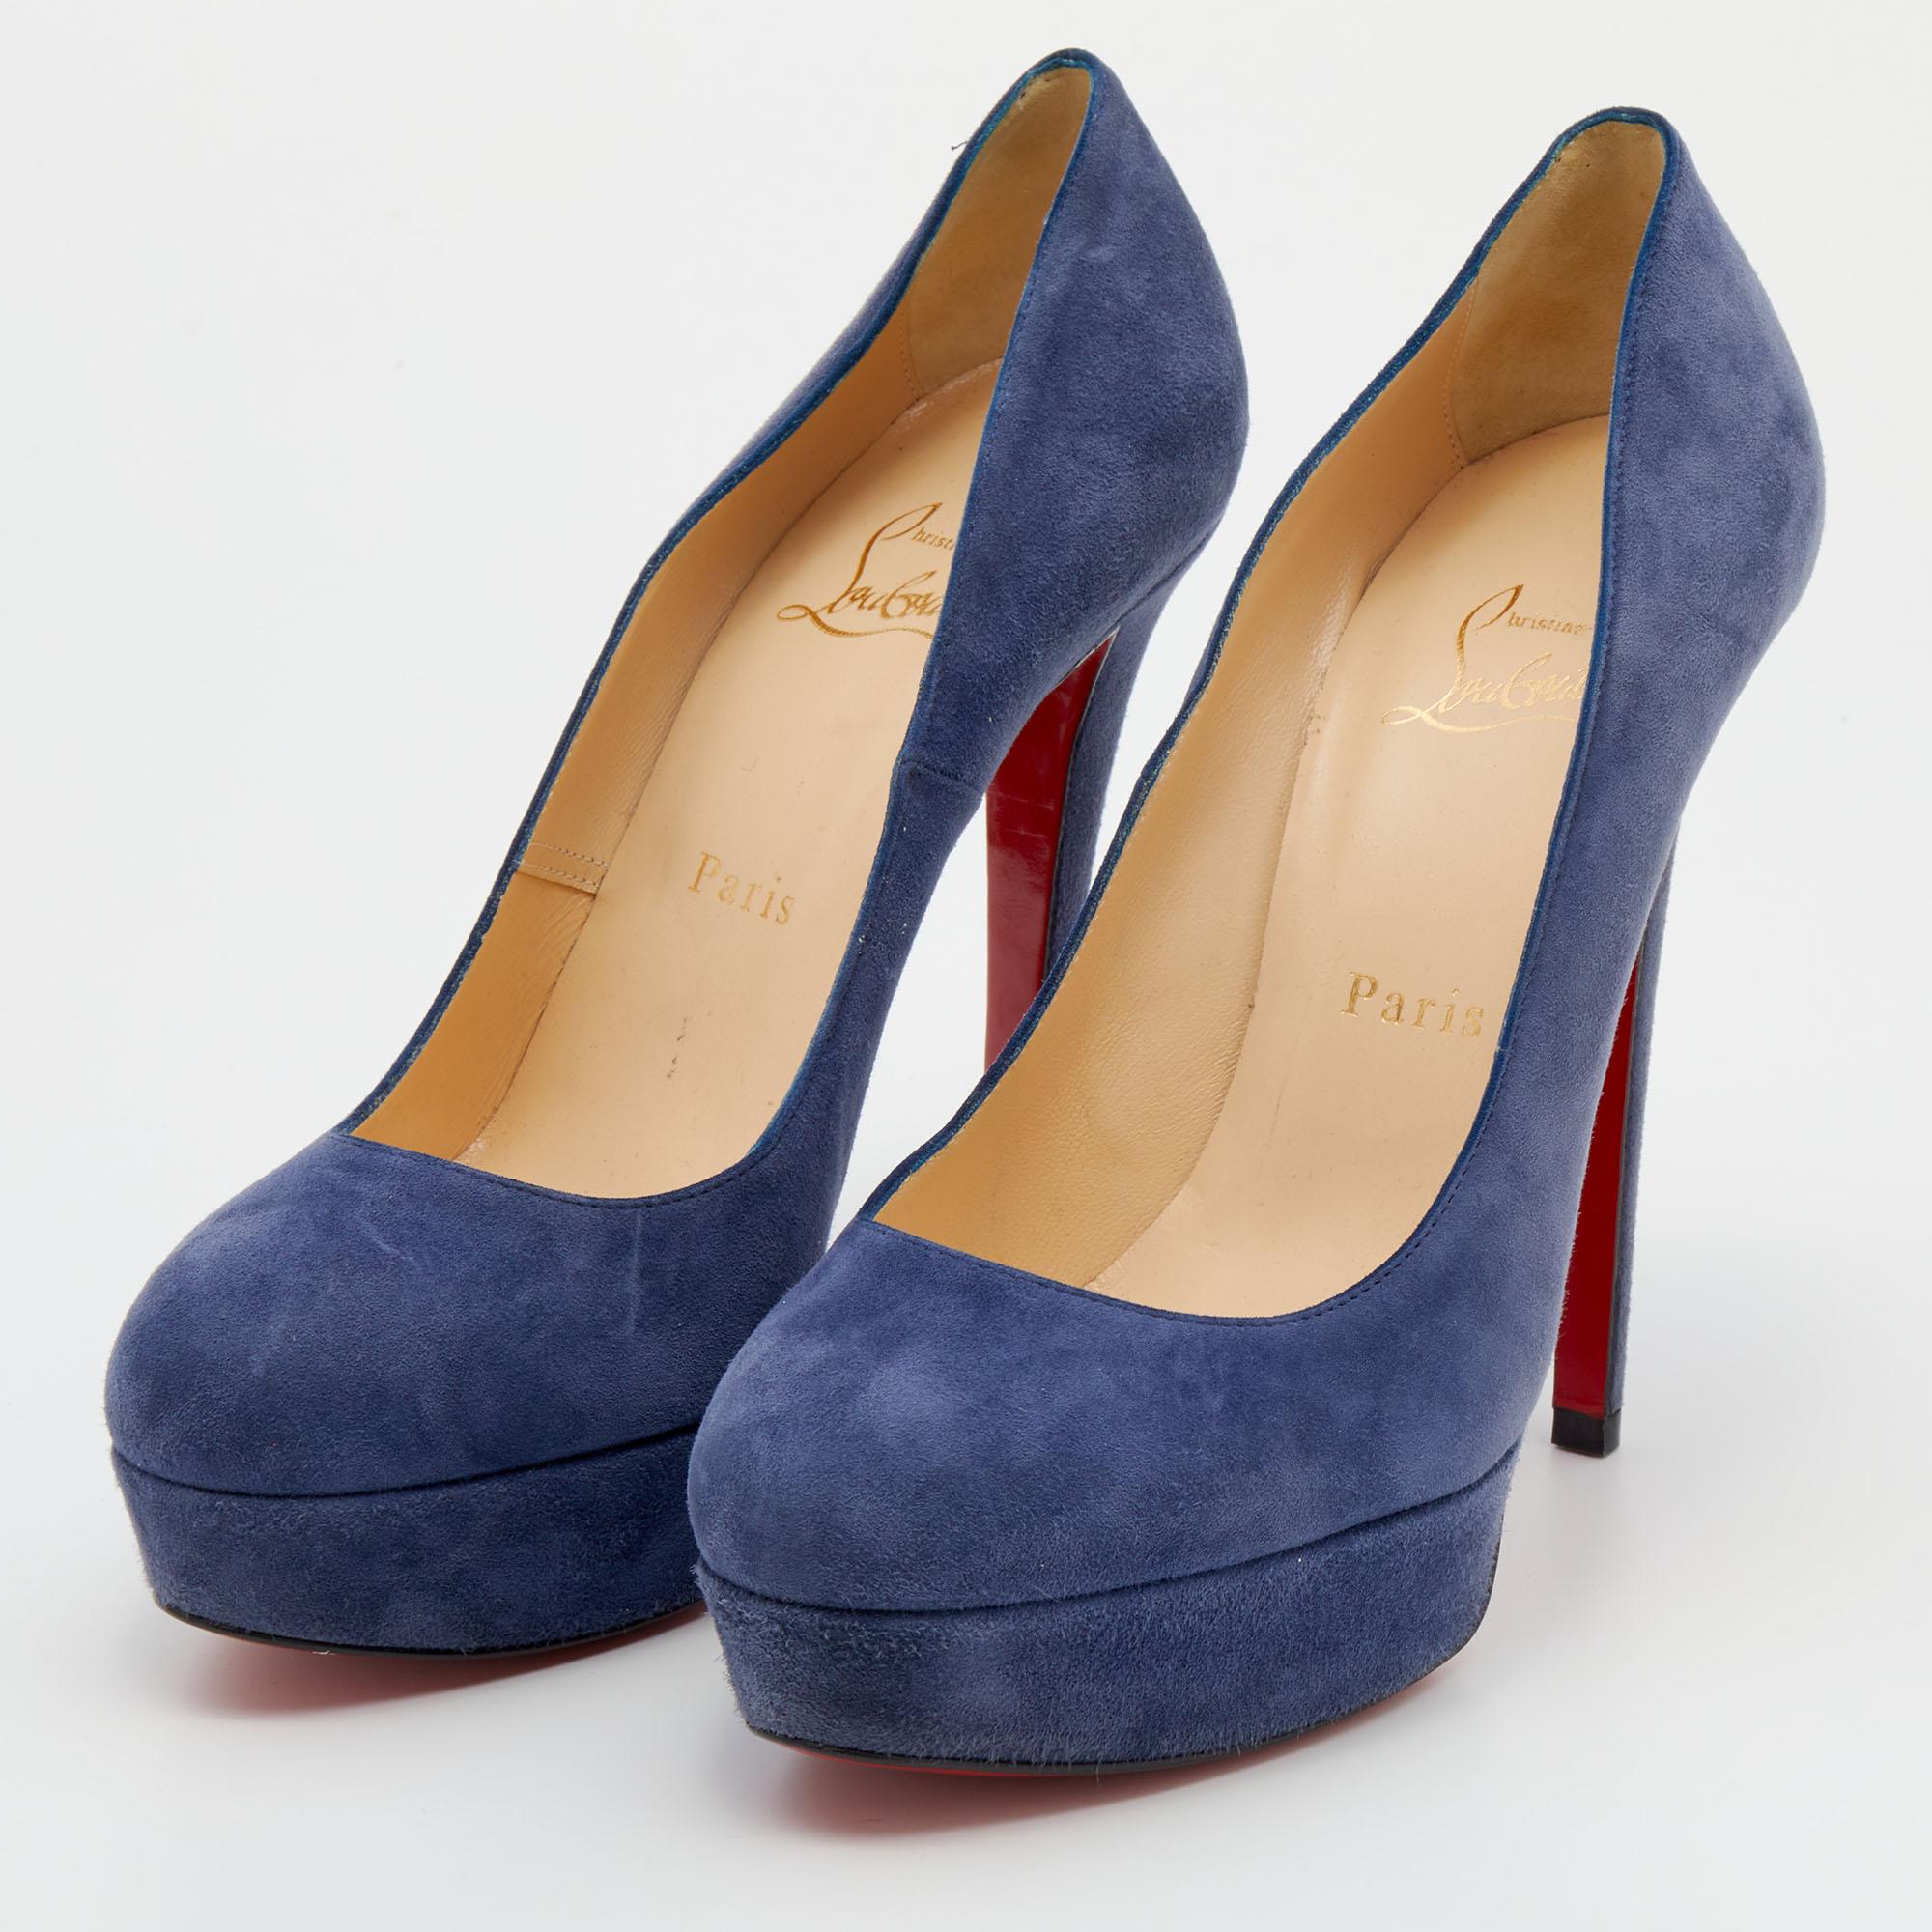 Every flawless design of Christian Louboutin, like this pair of Bianca pumps, is the epitome of feminine style. Crafted from suede, its blue upper is balanced on 13.5cm heels and platforms. The signature red-lacquered sole of these shoes marks the